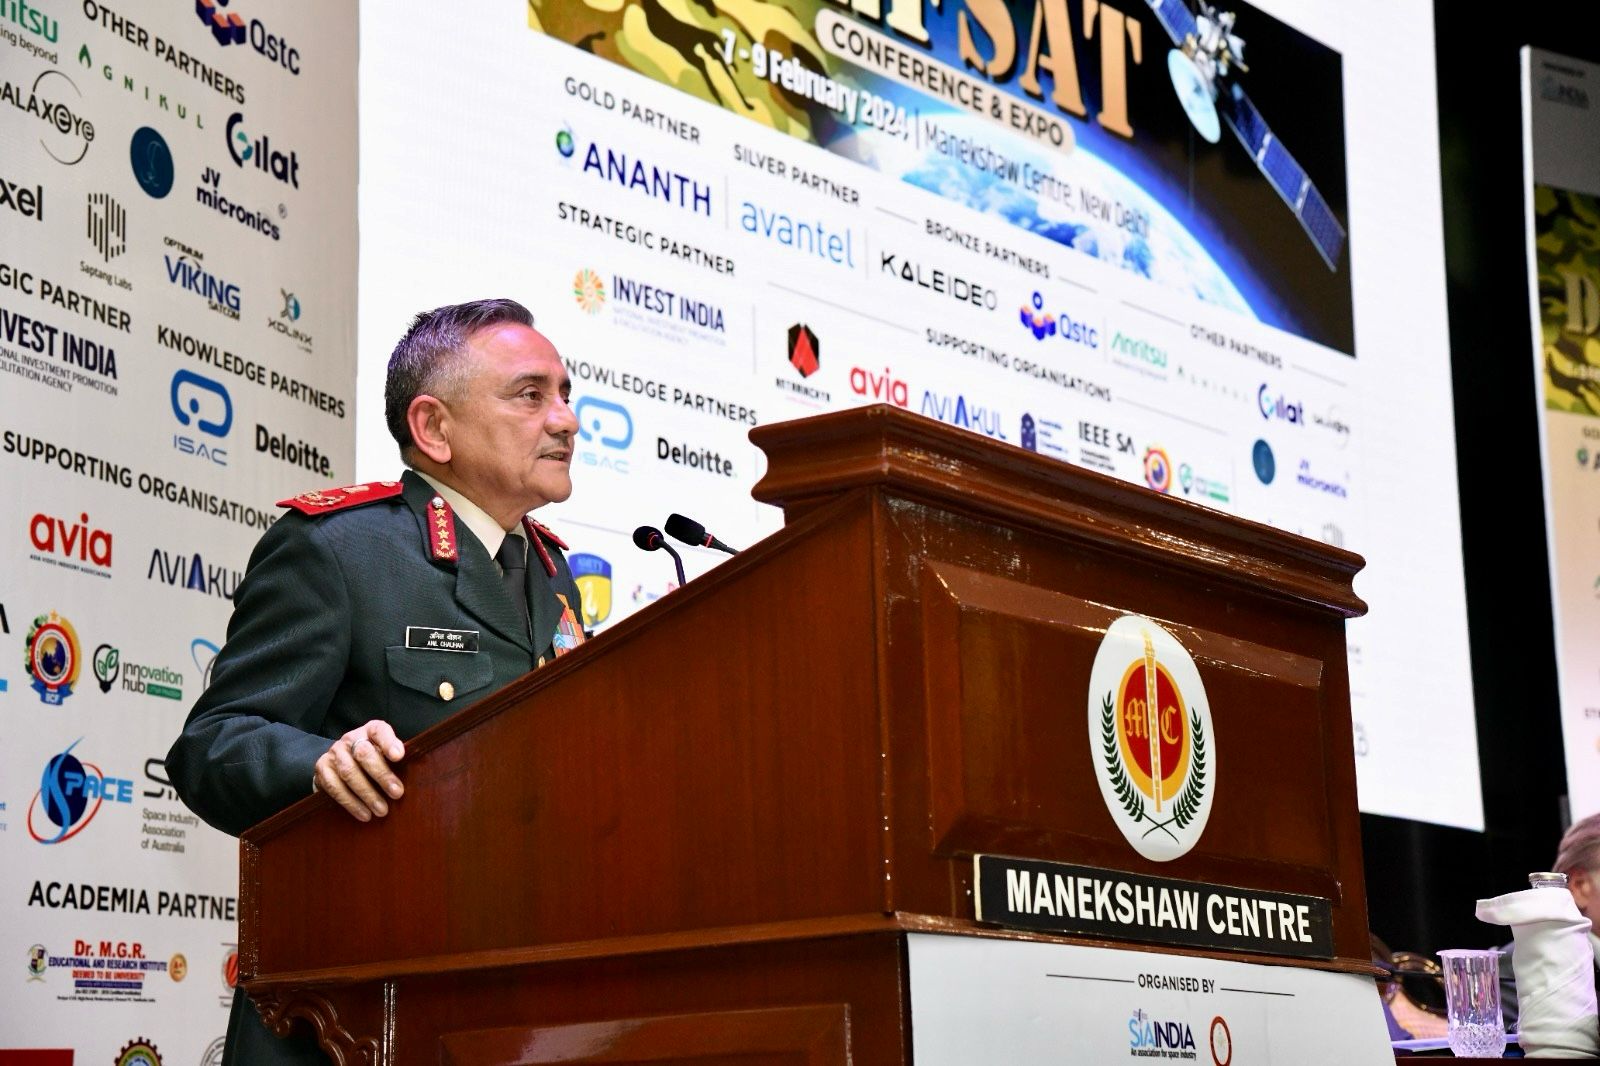 CDS Urges Industry To Work On Counter-Space Capabilities For National Security